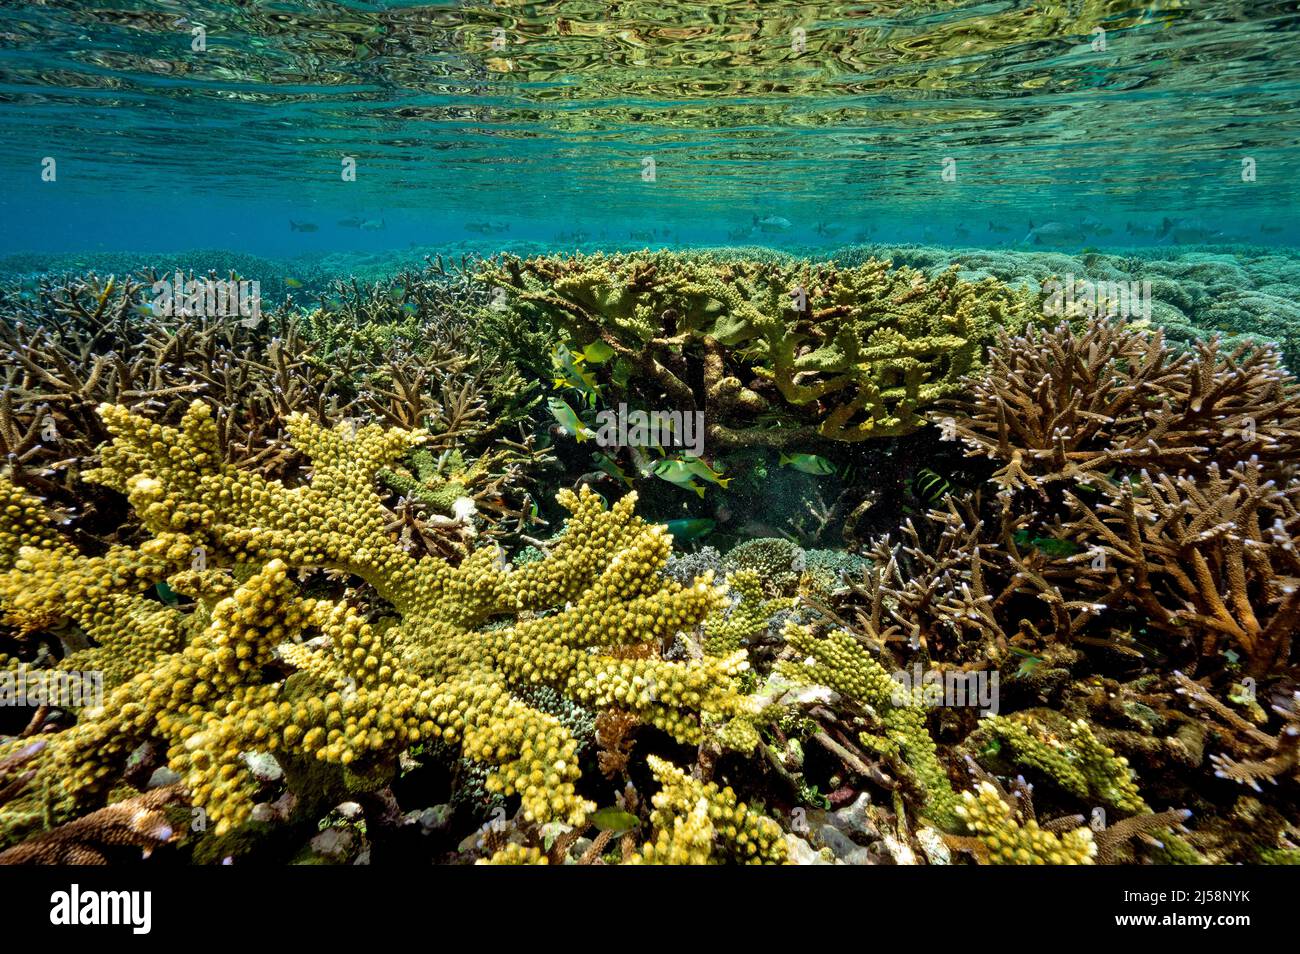 Reef crest with branching hard corals Raja Ampat Indonesia. Stock Photo